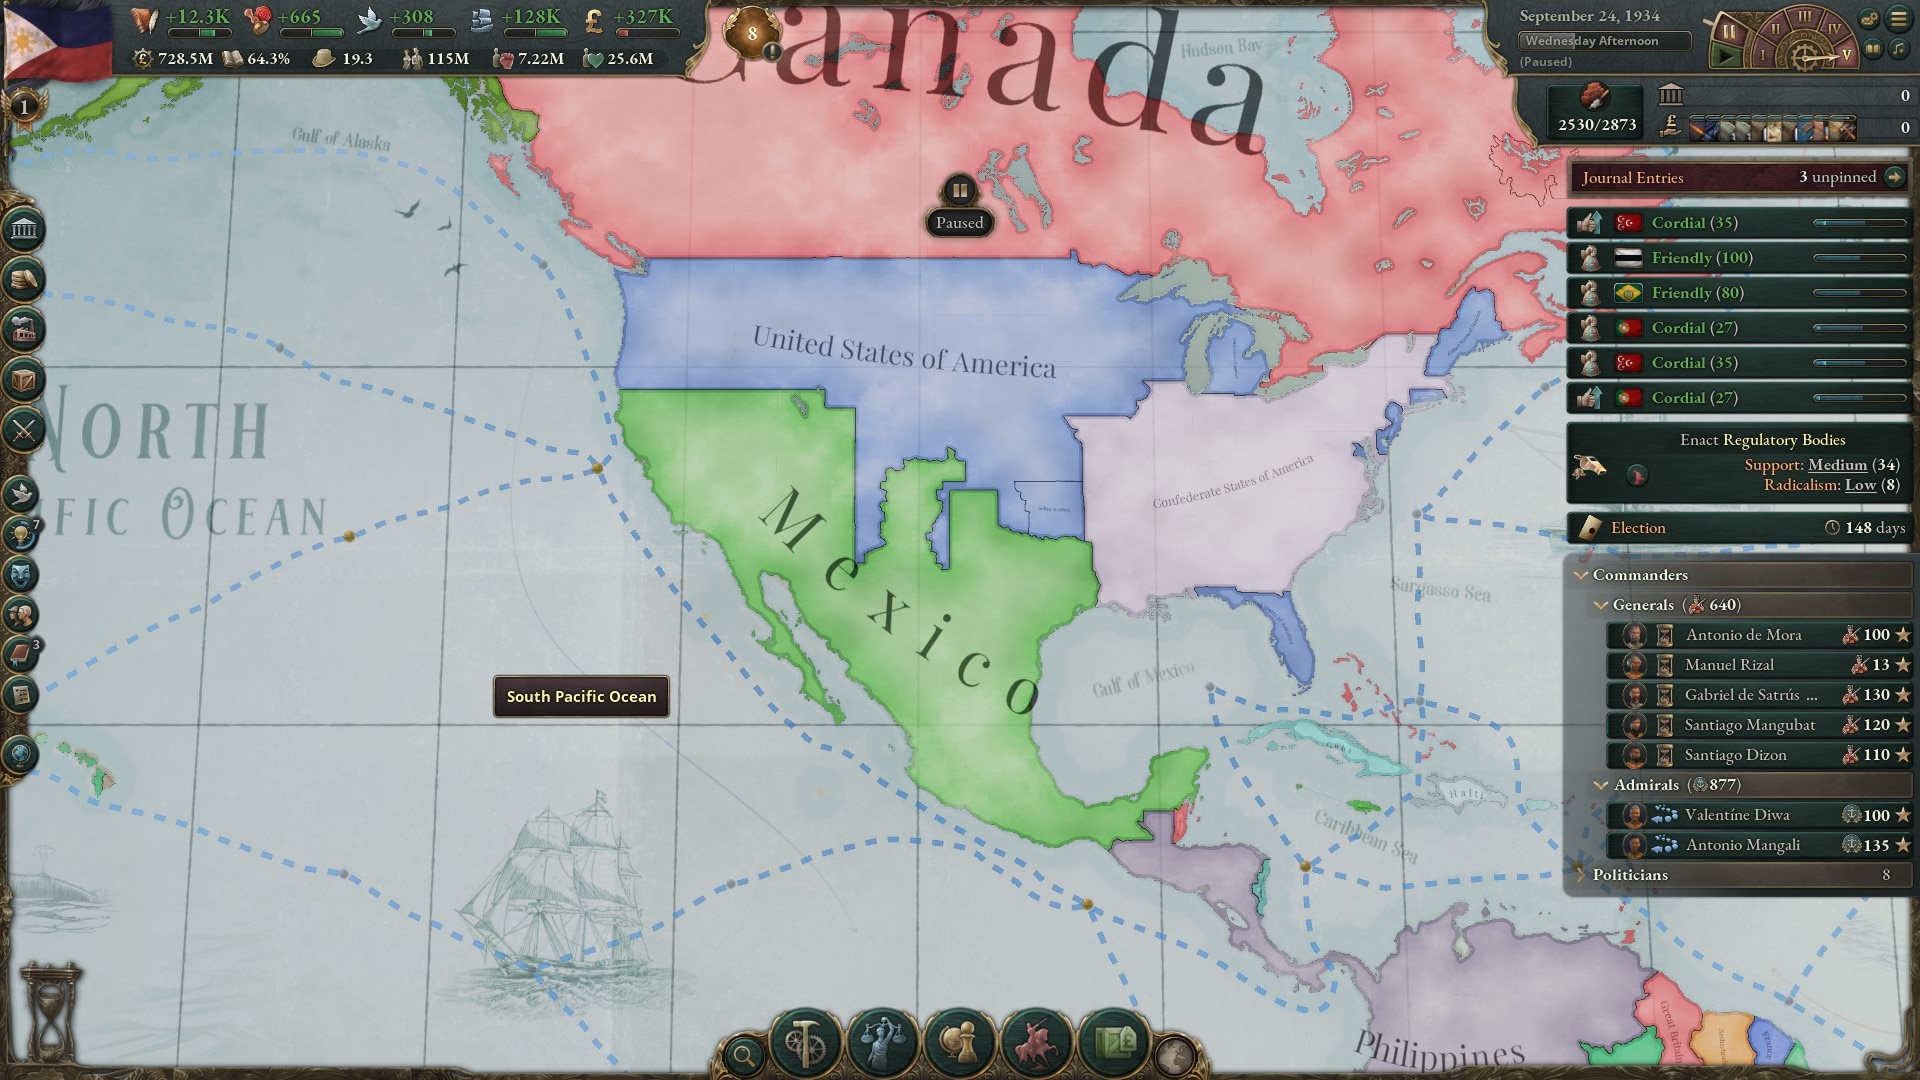 CK3 Dev Diary #79 - An Update on Cultures